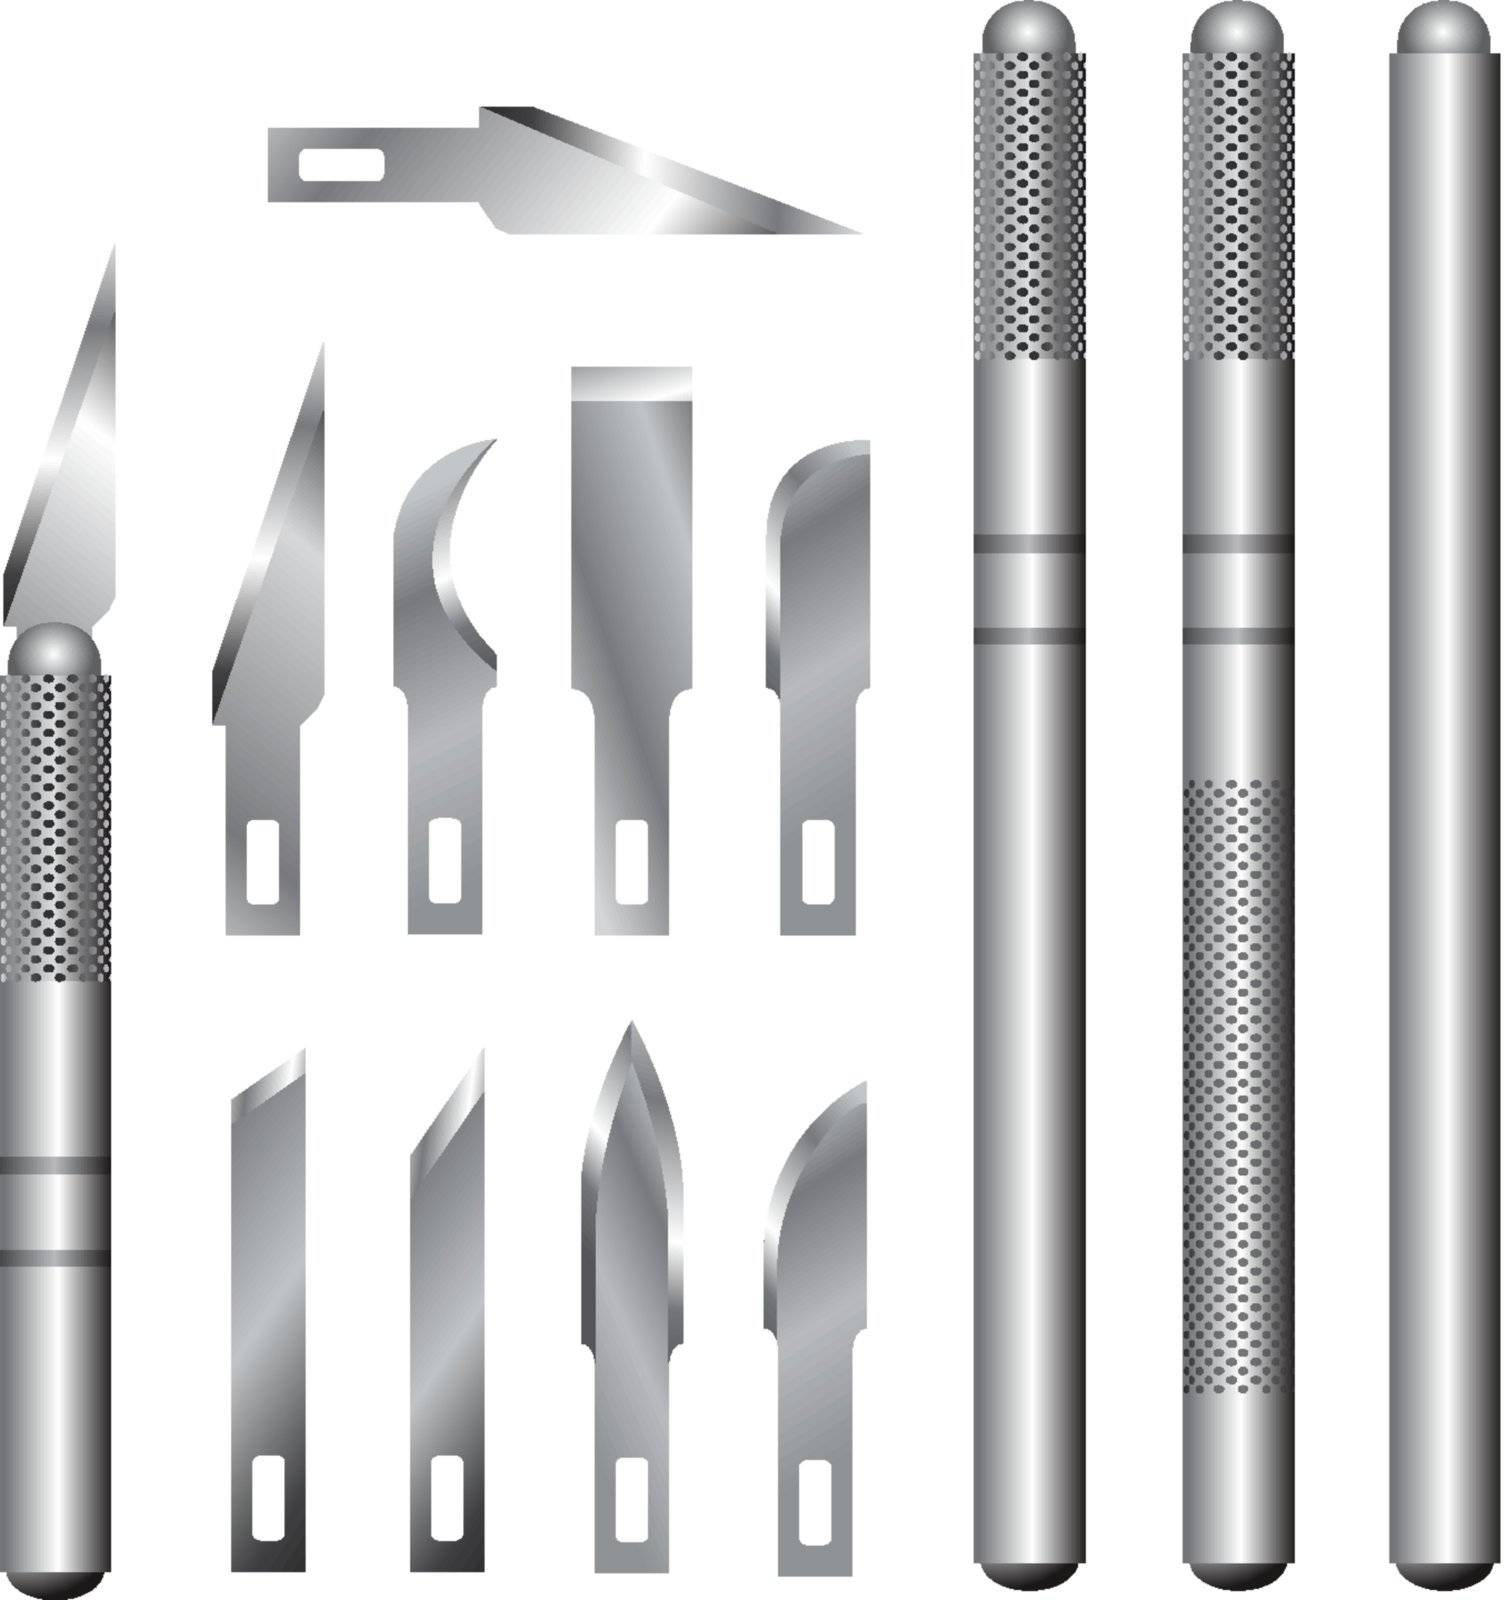 Detailed vector illustration of hobby and utility knife handles and blades.